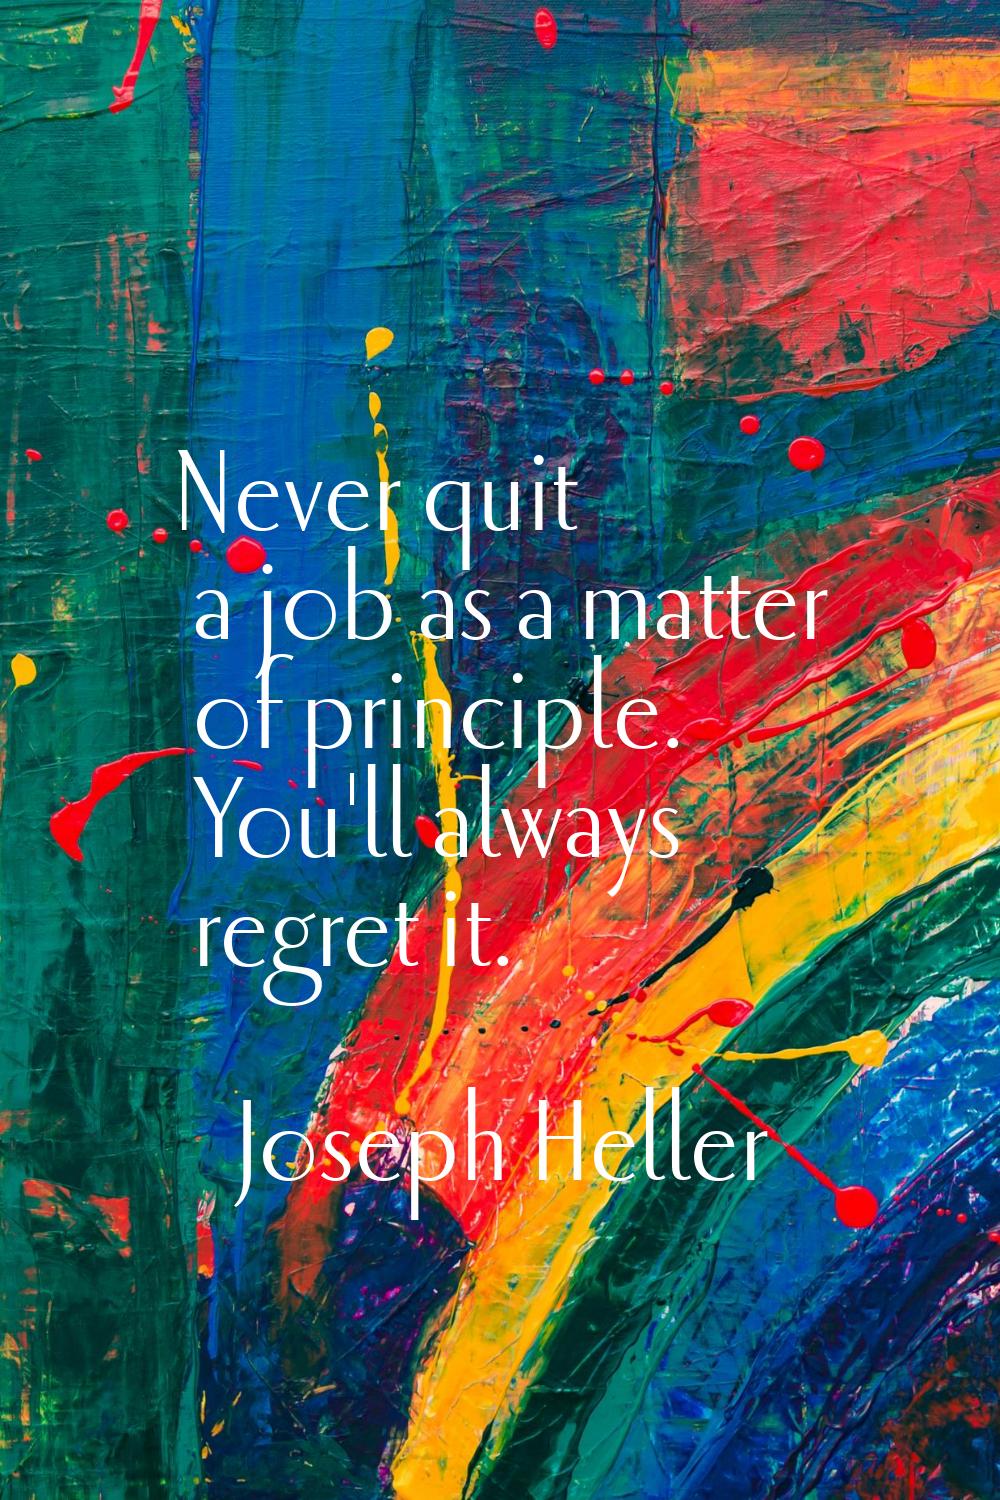 Never quit a job as a matter of principle. You'll always regret it.